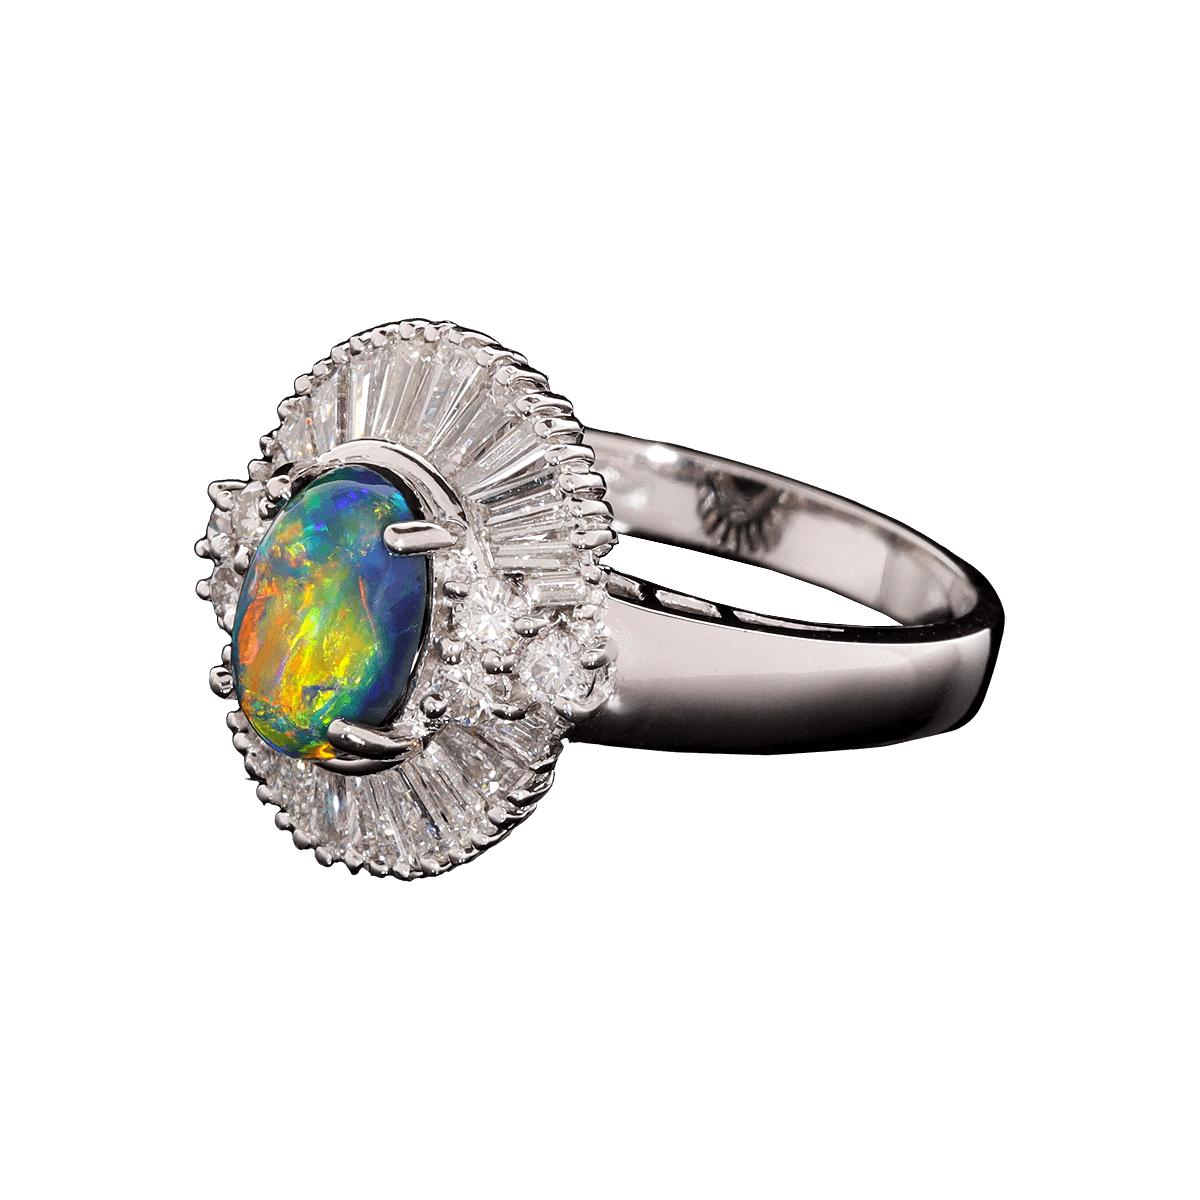 A very special ring made for that very special occasion - one where your heart is given with all the love you have to give. An Australian opal with rich, bright colours that beam in any light; diamonds that glow and twinkle with every movement.